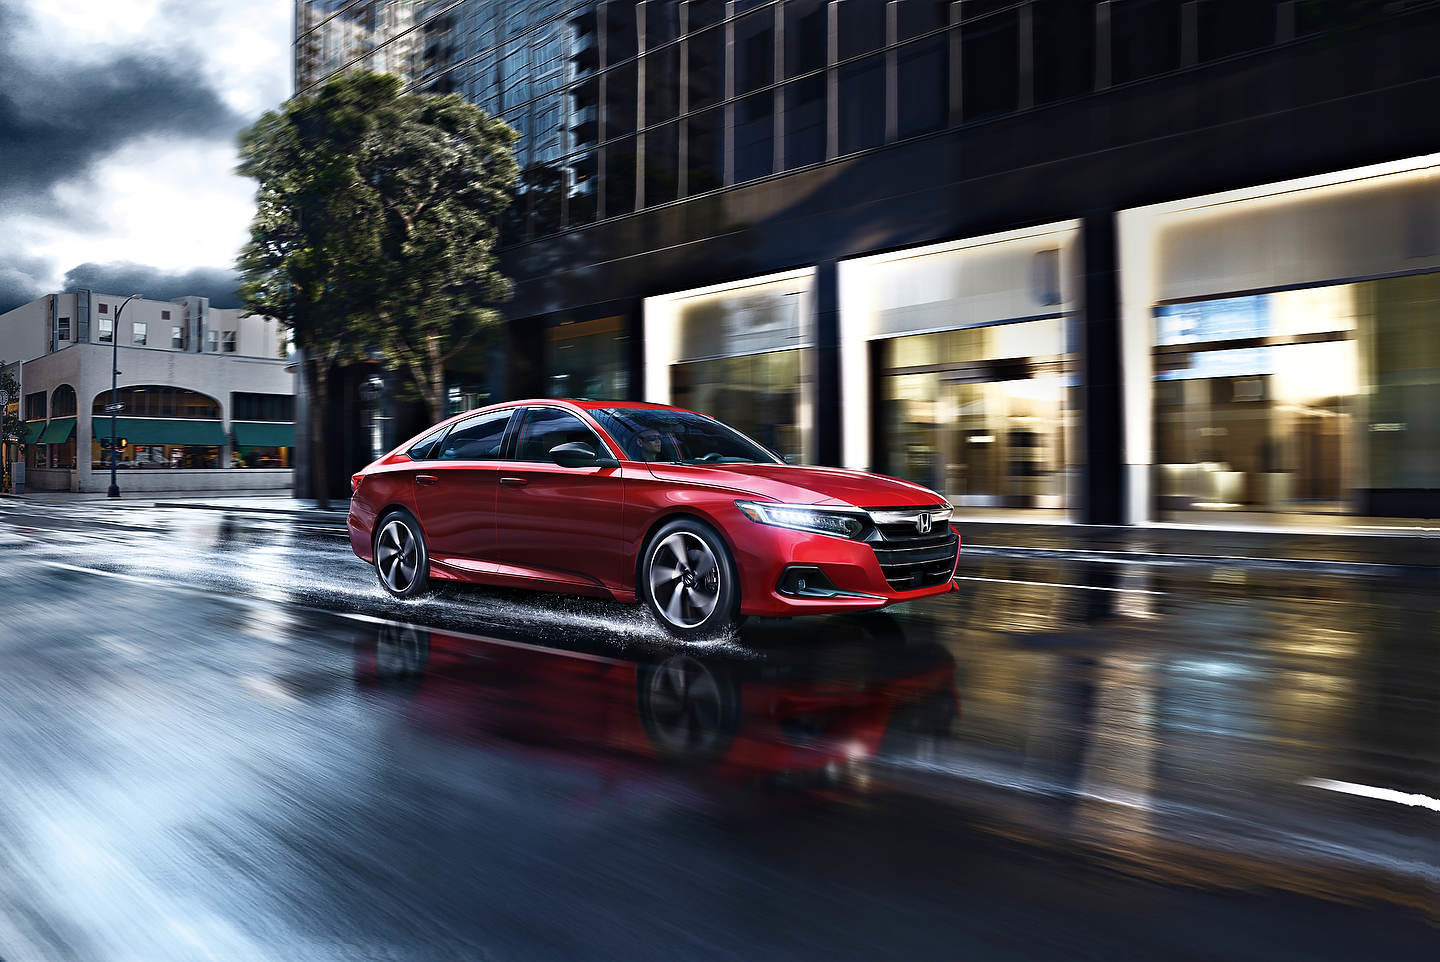 2022 Honda Accord: A different kind of luxury